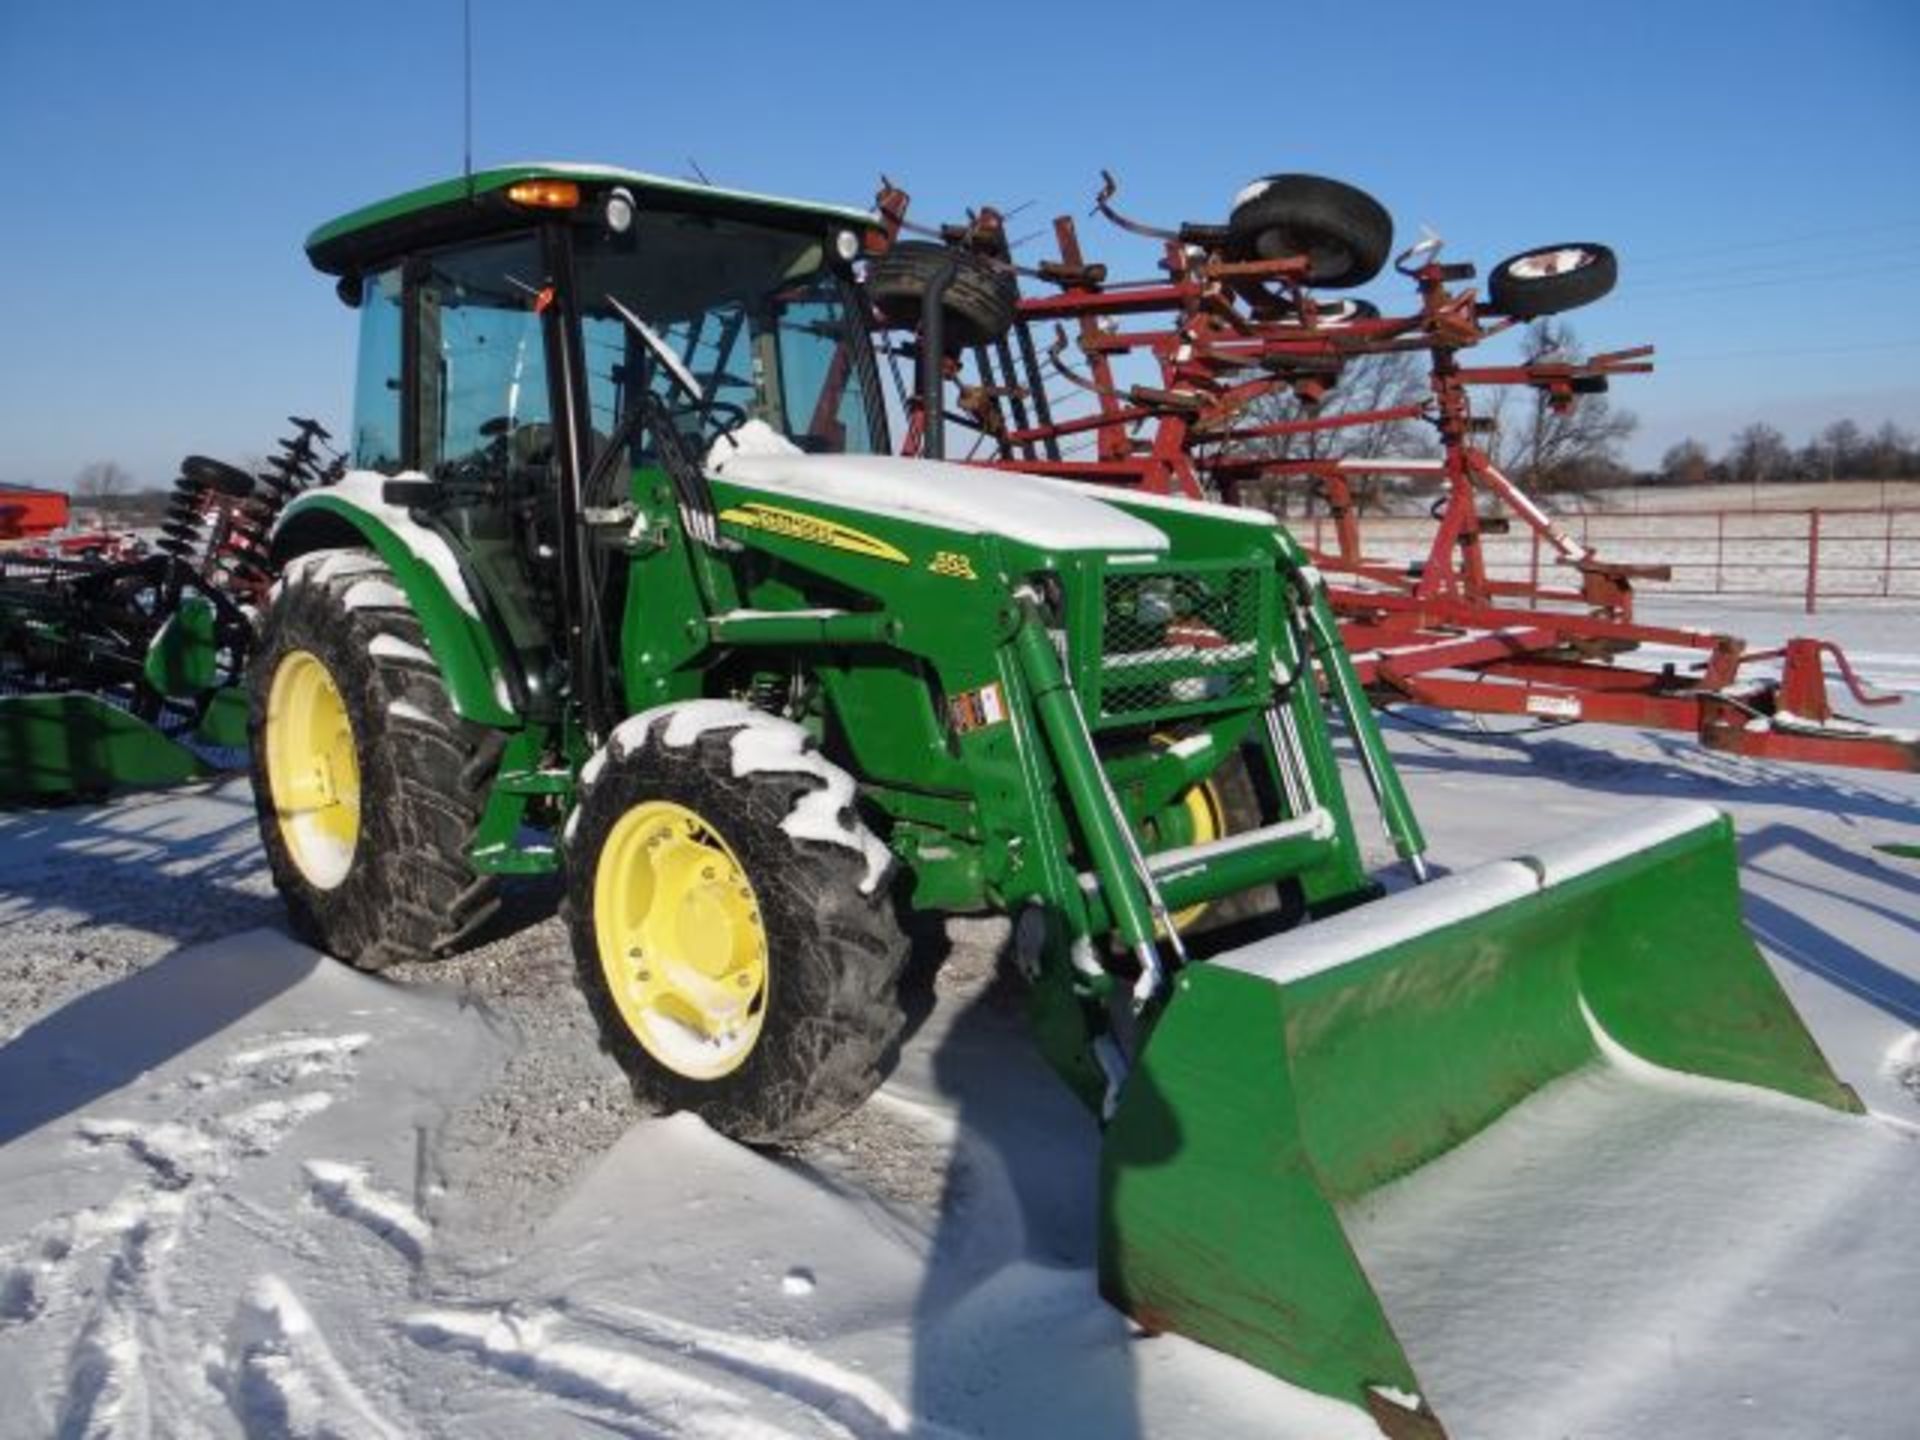 JD 5075M Tractor #56977 MFWD, Fronts 11.2-24, Rears 16.9-30. 16x16 Transmission. 540/540E PTO. 2 - Image 3 of 4